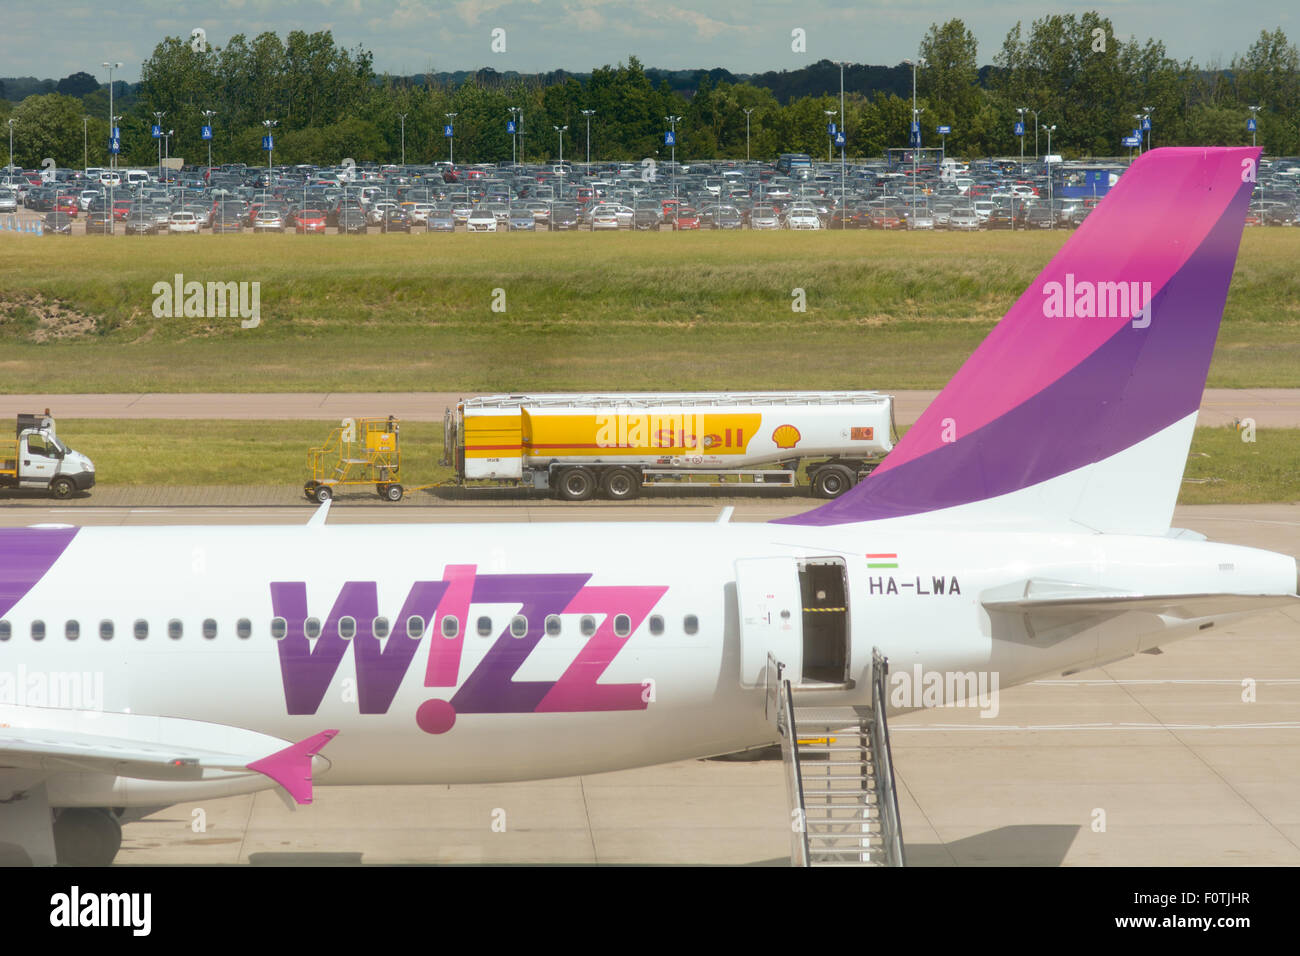 Wizzair.com plane on the ground at Luton Airport with Shell fuel tanker in background at Luton, Bedfordshire, England Stock Photo